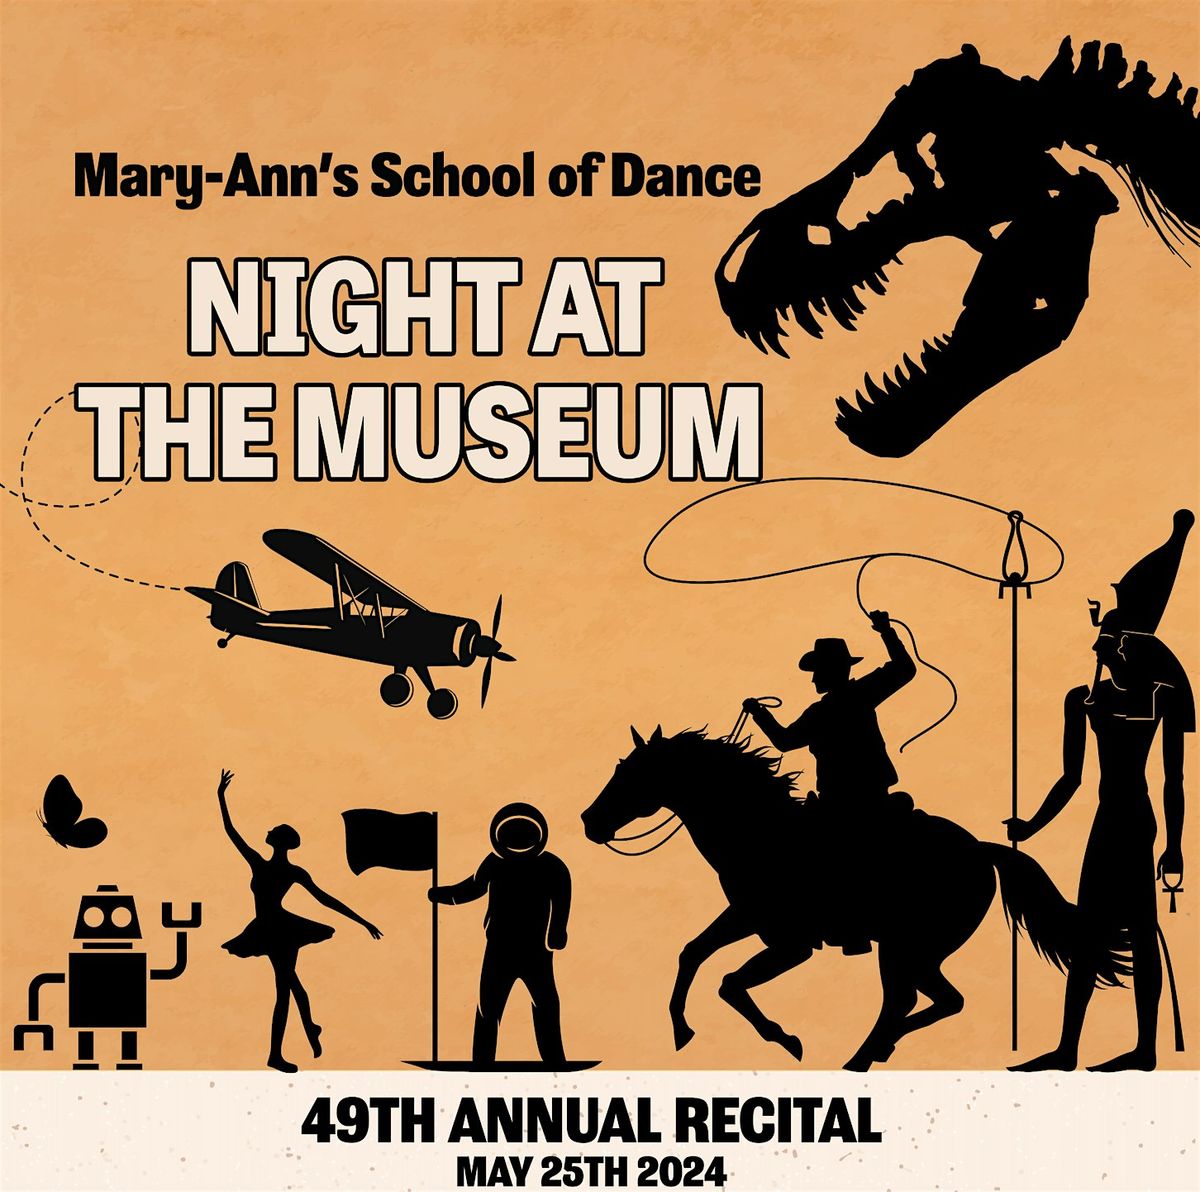 Night at the Museum - Mary-Ann's School of Dance 2024 Recital